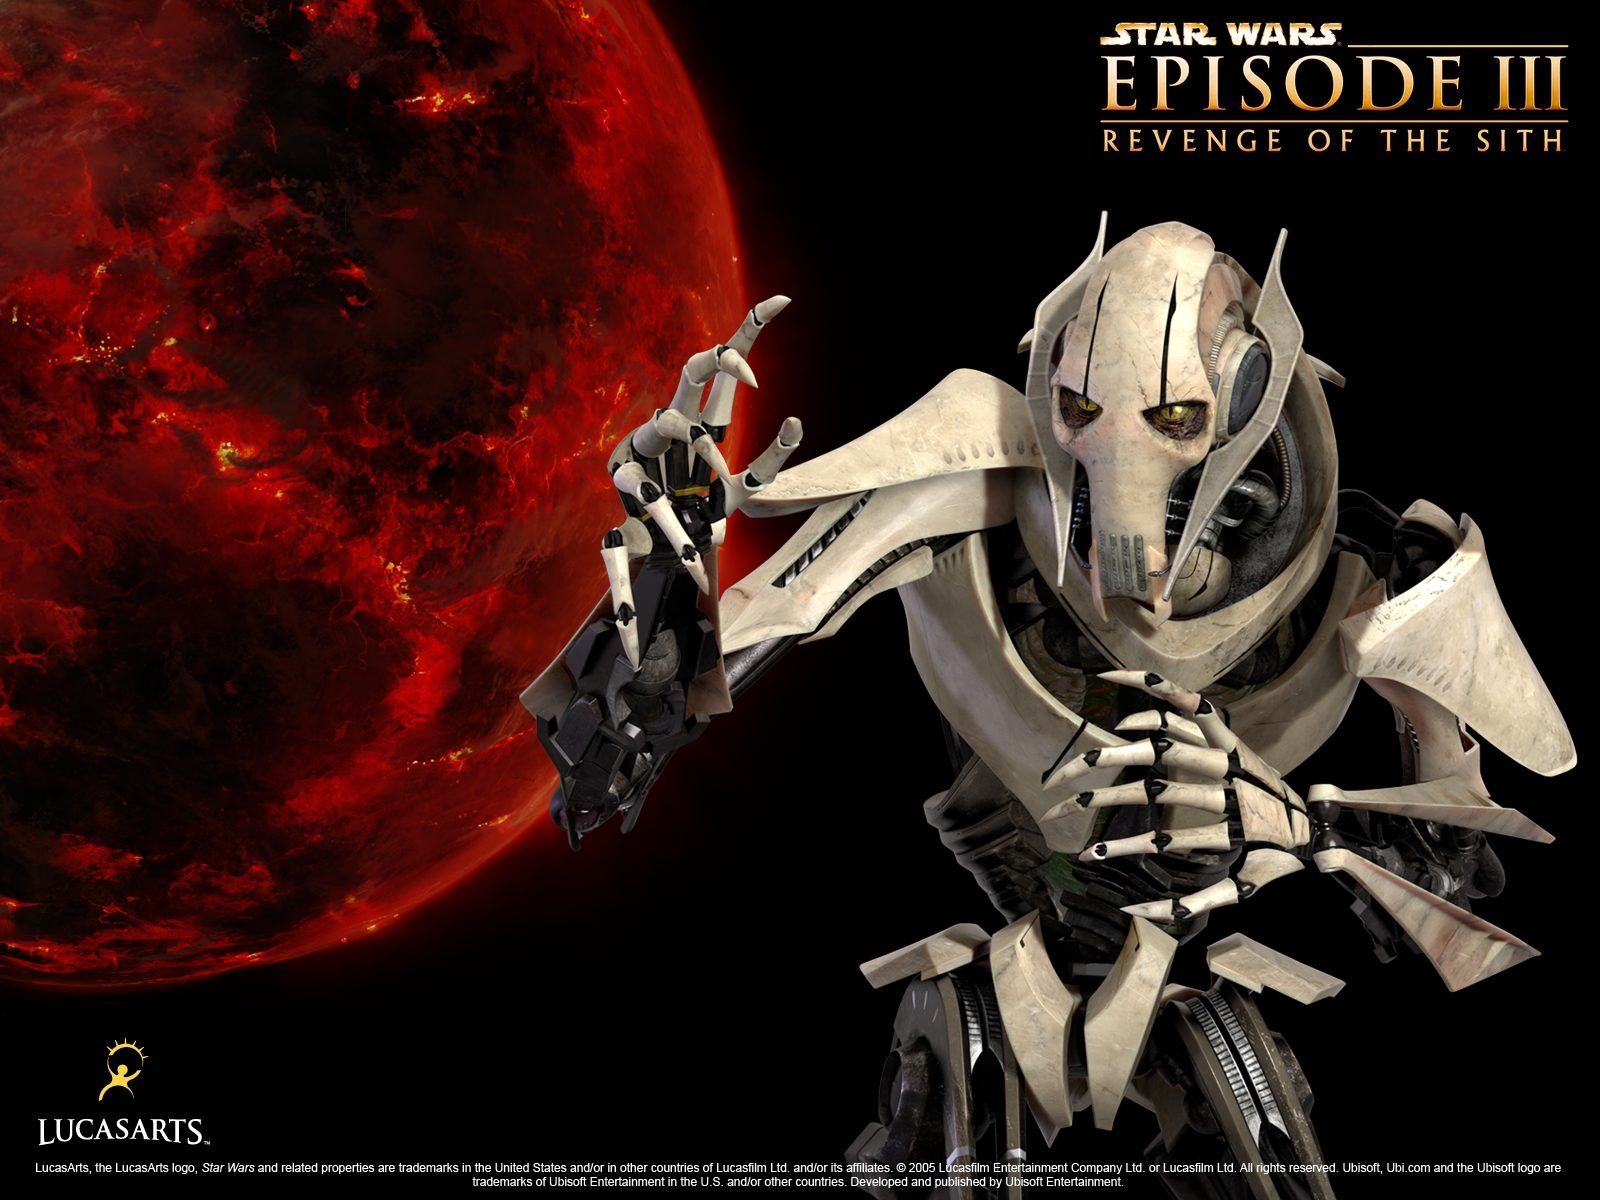 revenge of the sith ep iii general grievous star wars